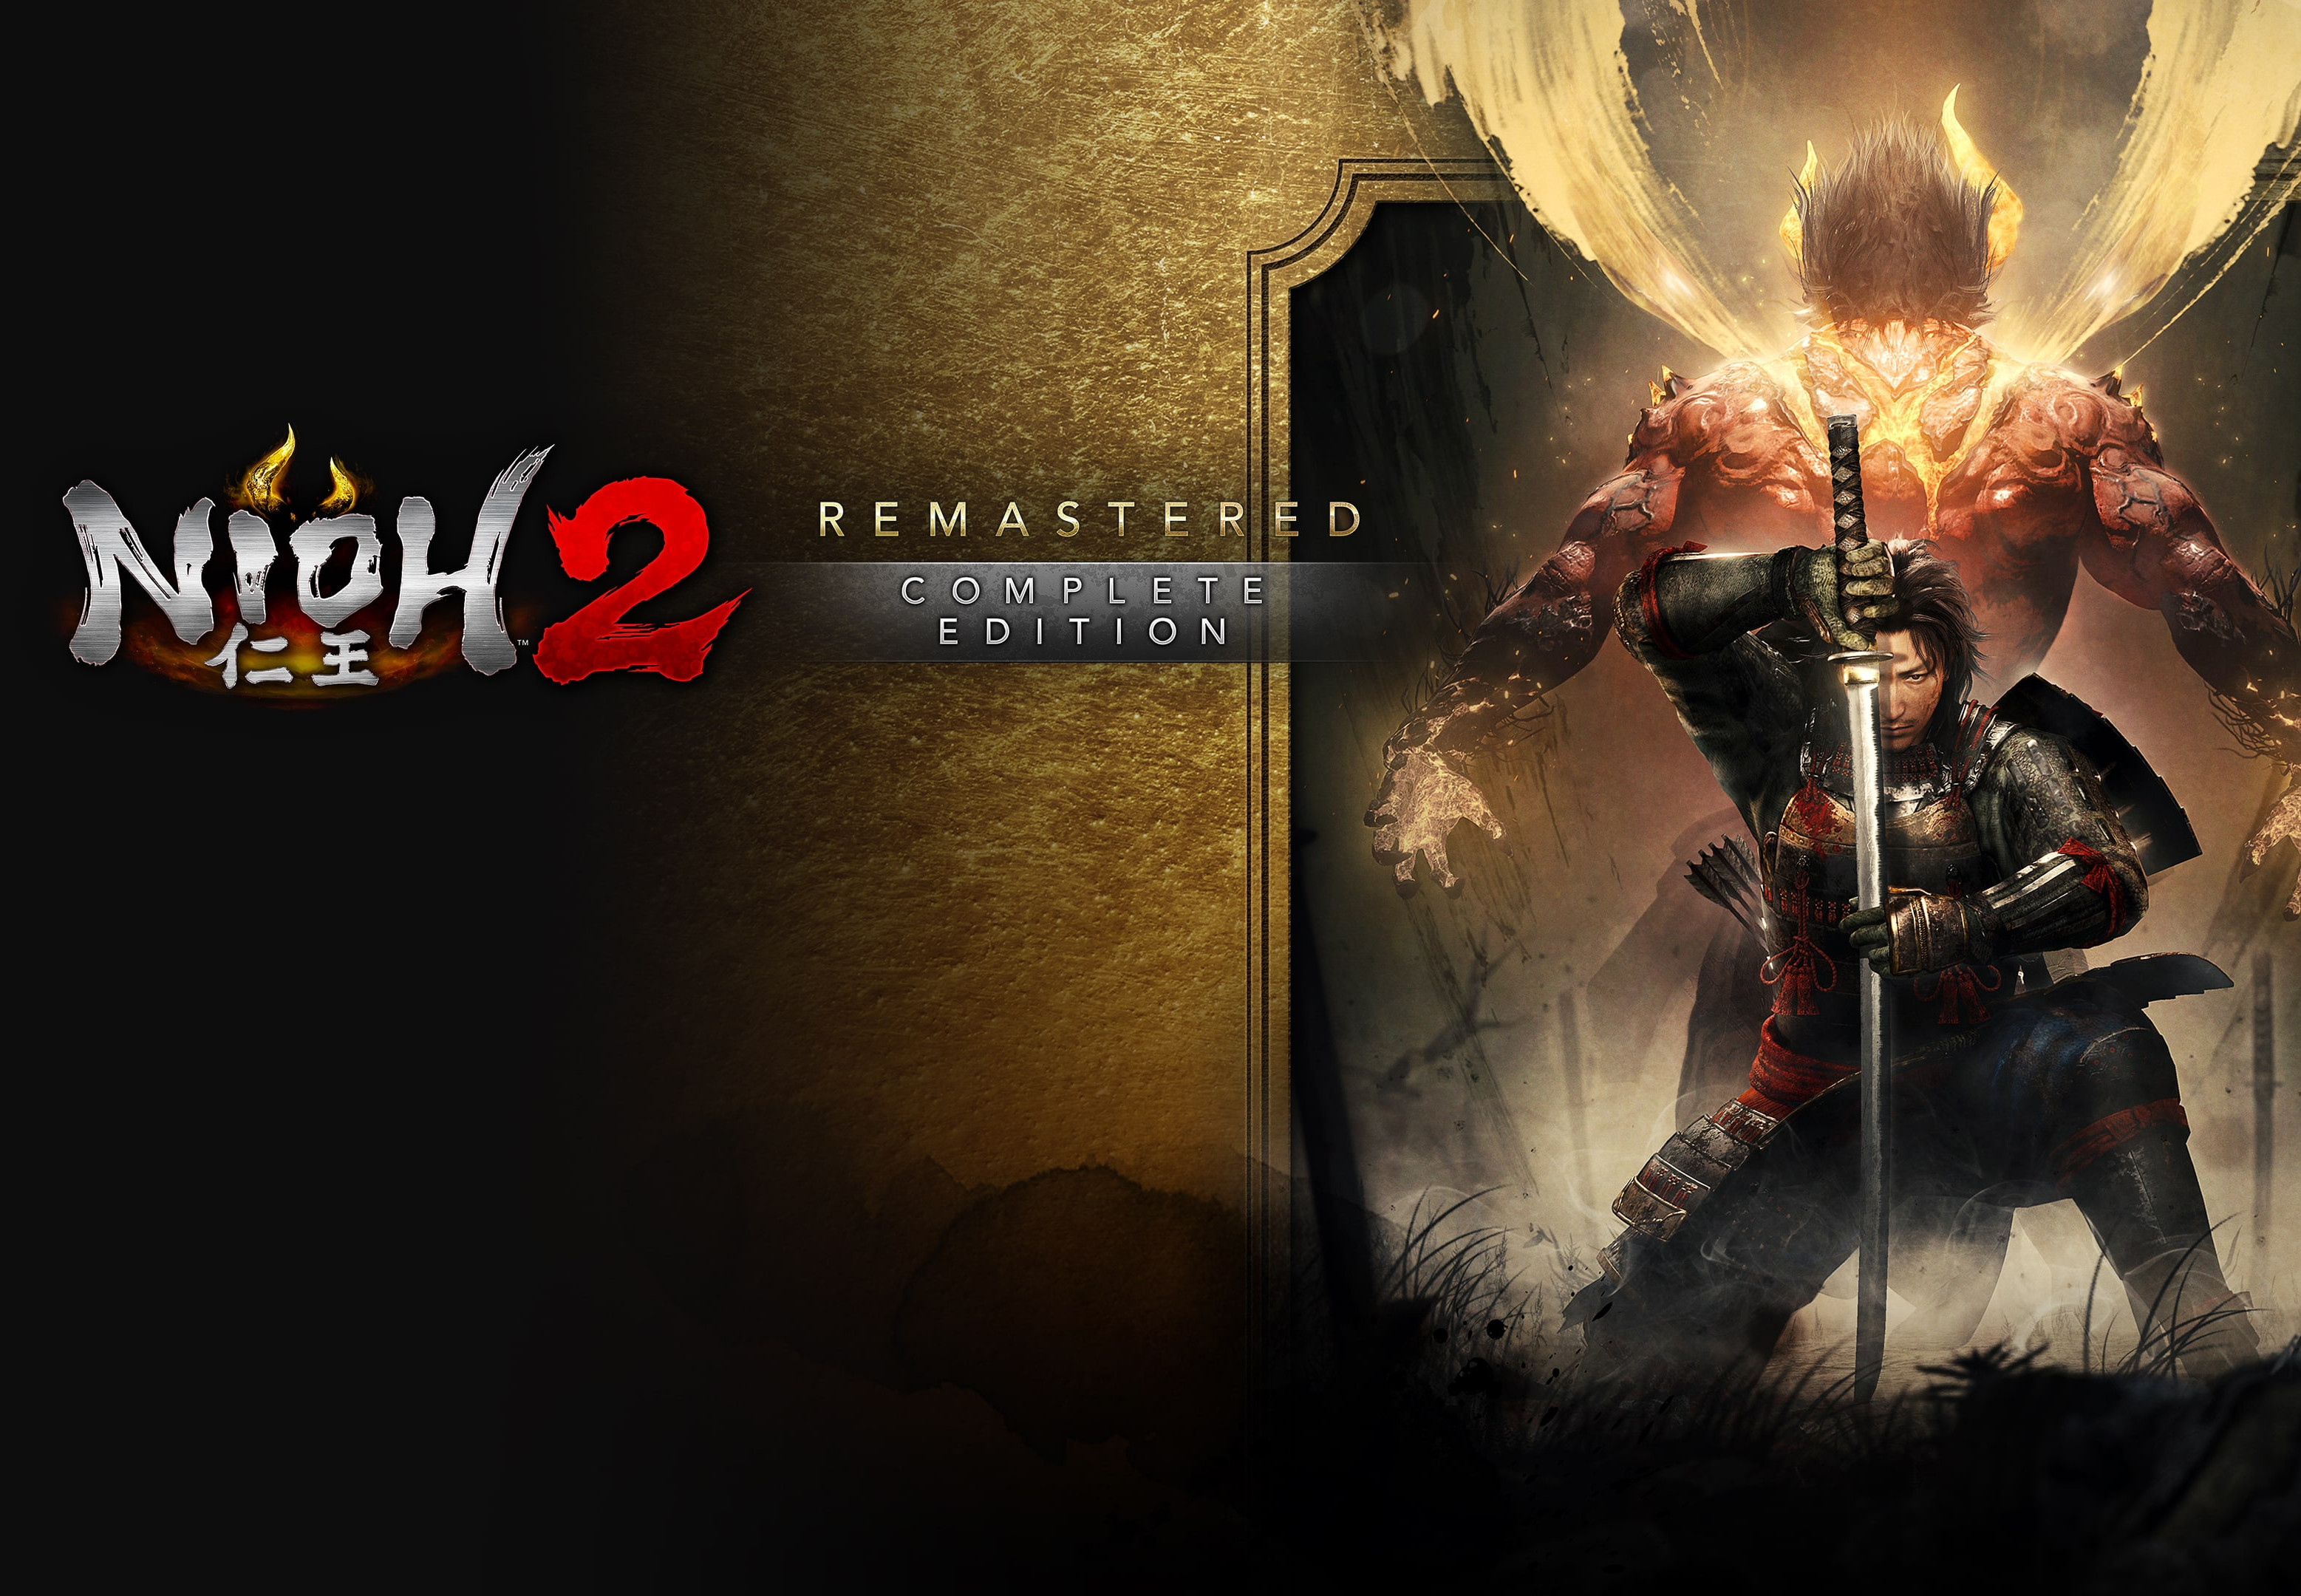 Nioh 2 Remastered – The Complete Edition PlayStation 4 Account